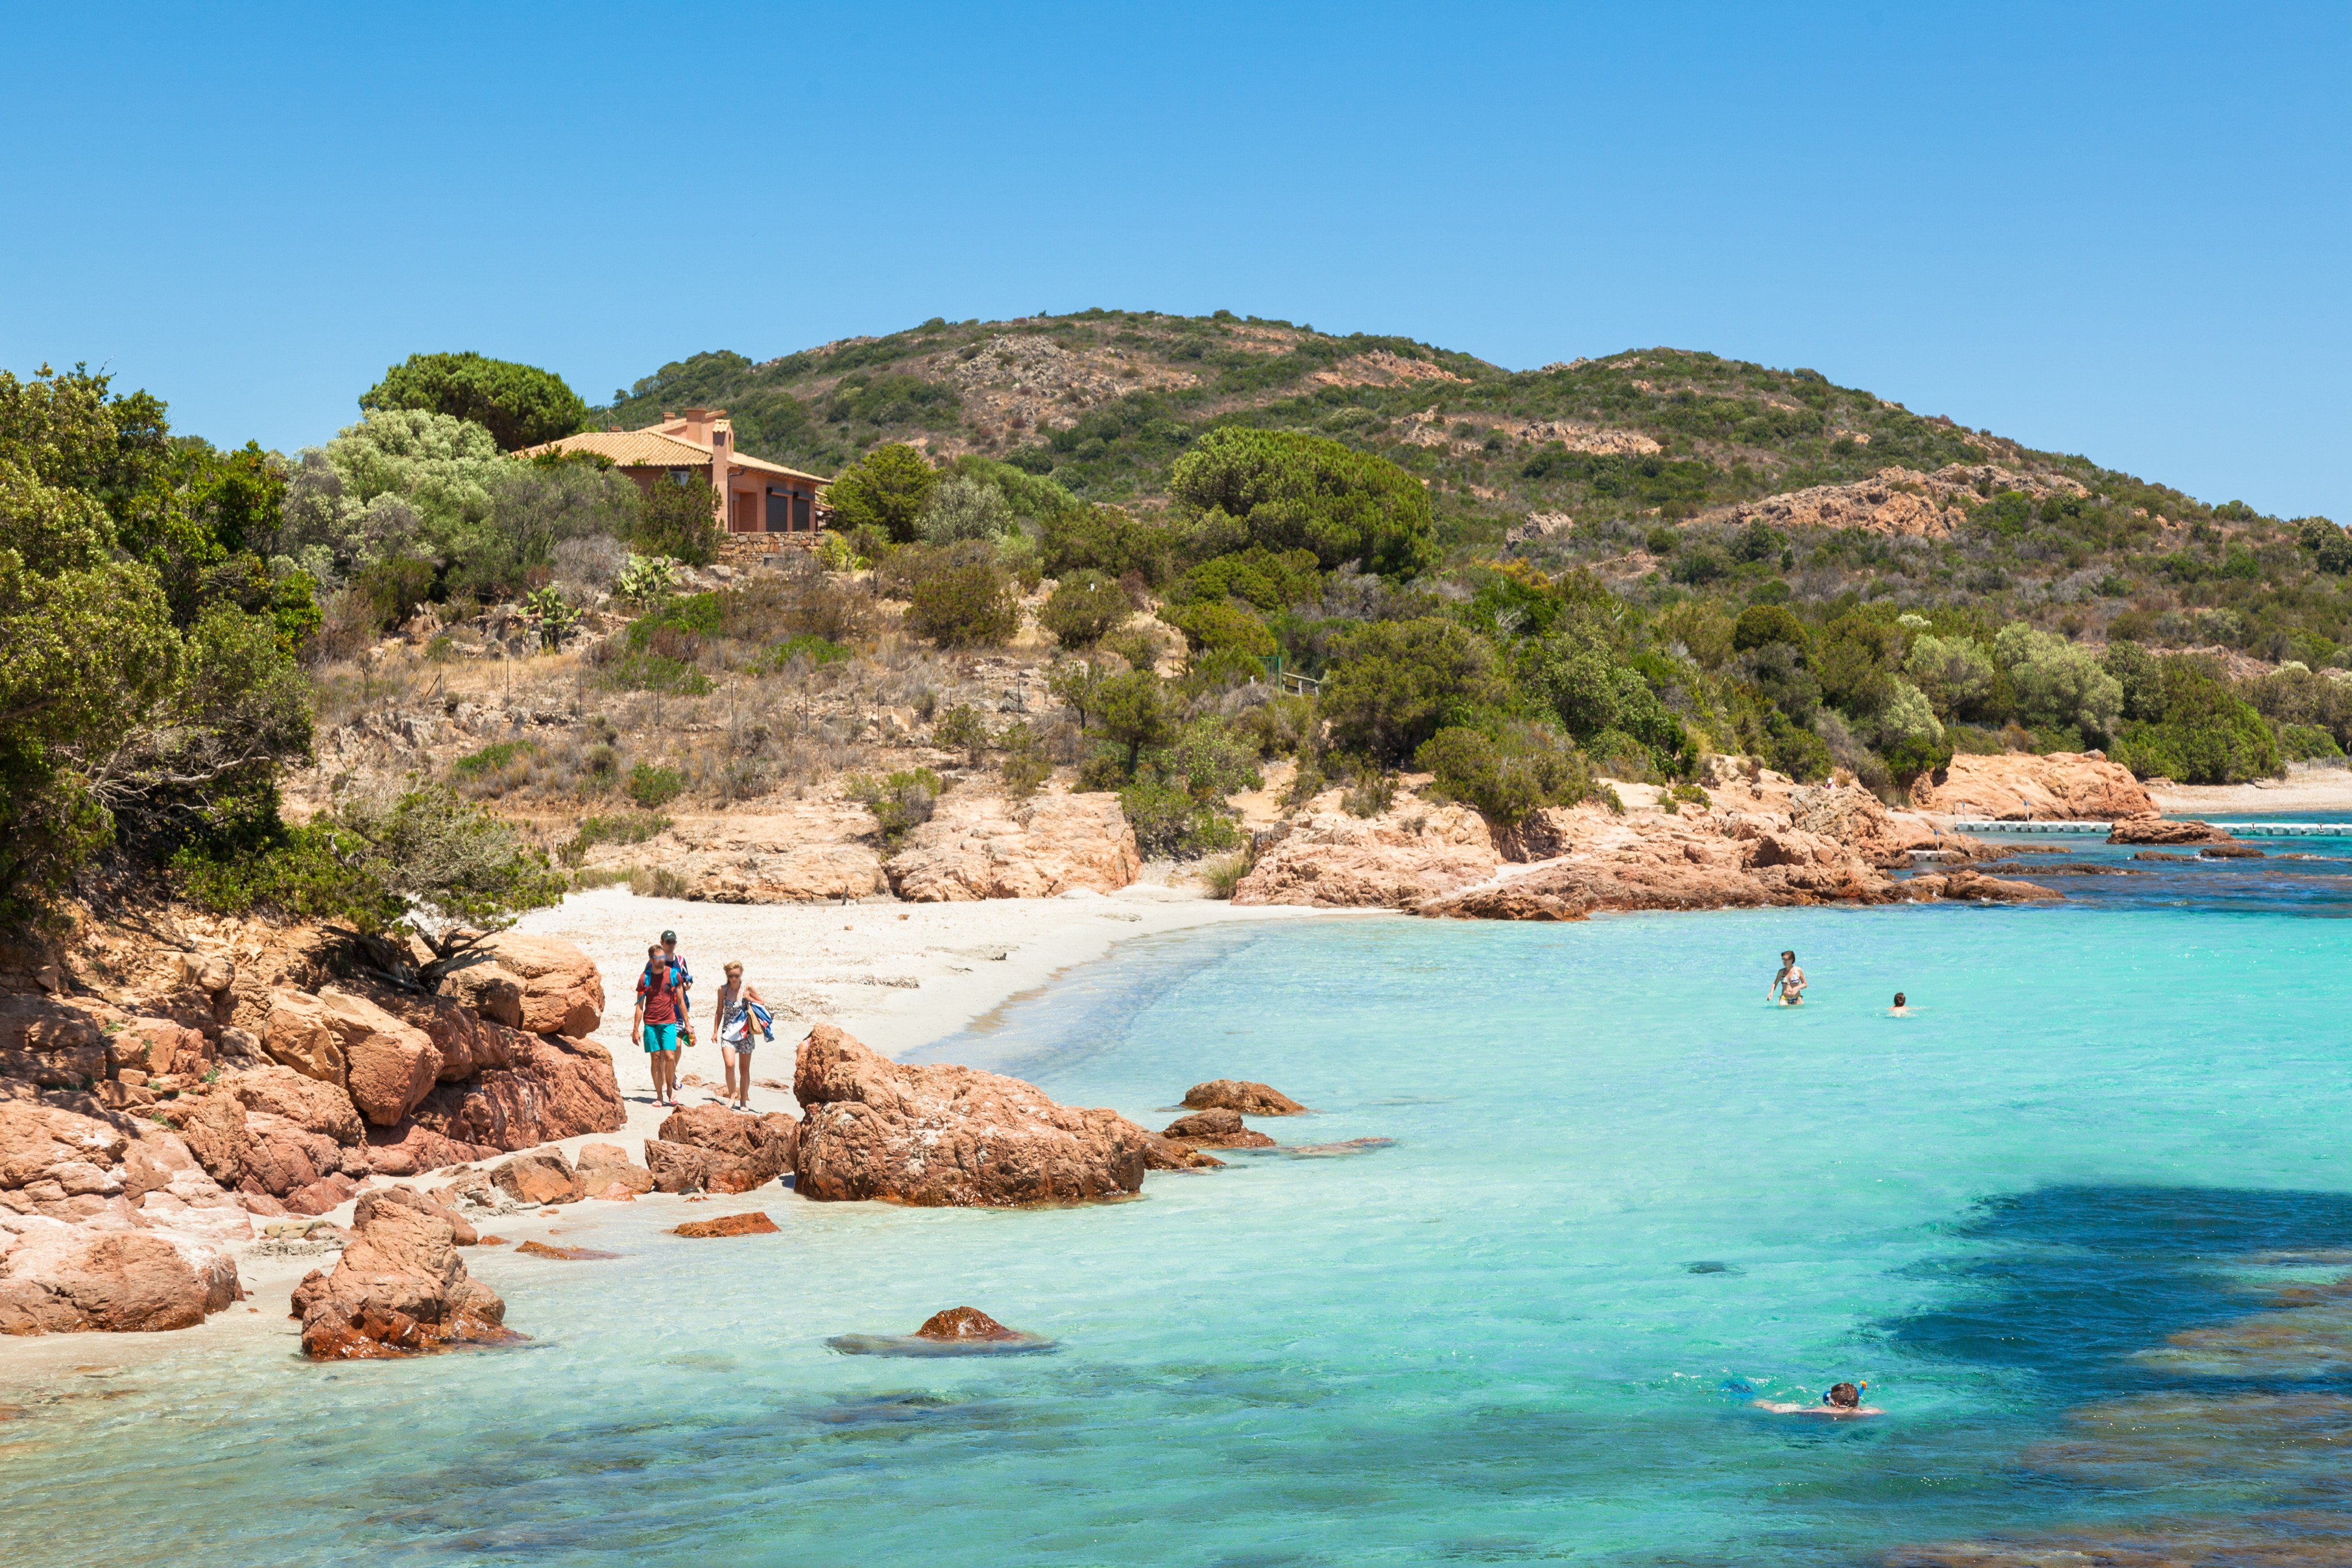 Corsica is dubbed the “French island with an Italian accent”. Photo: Shutterstock